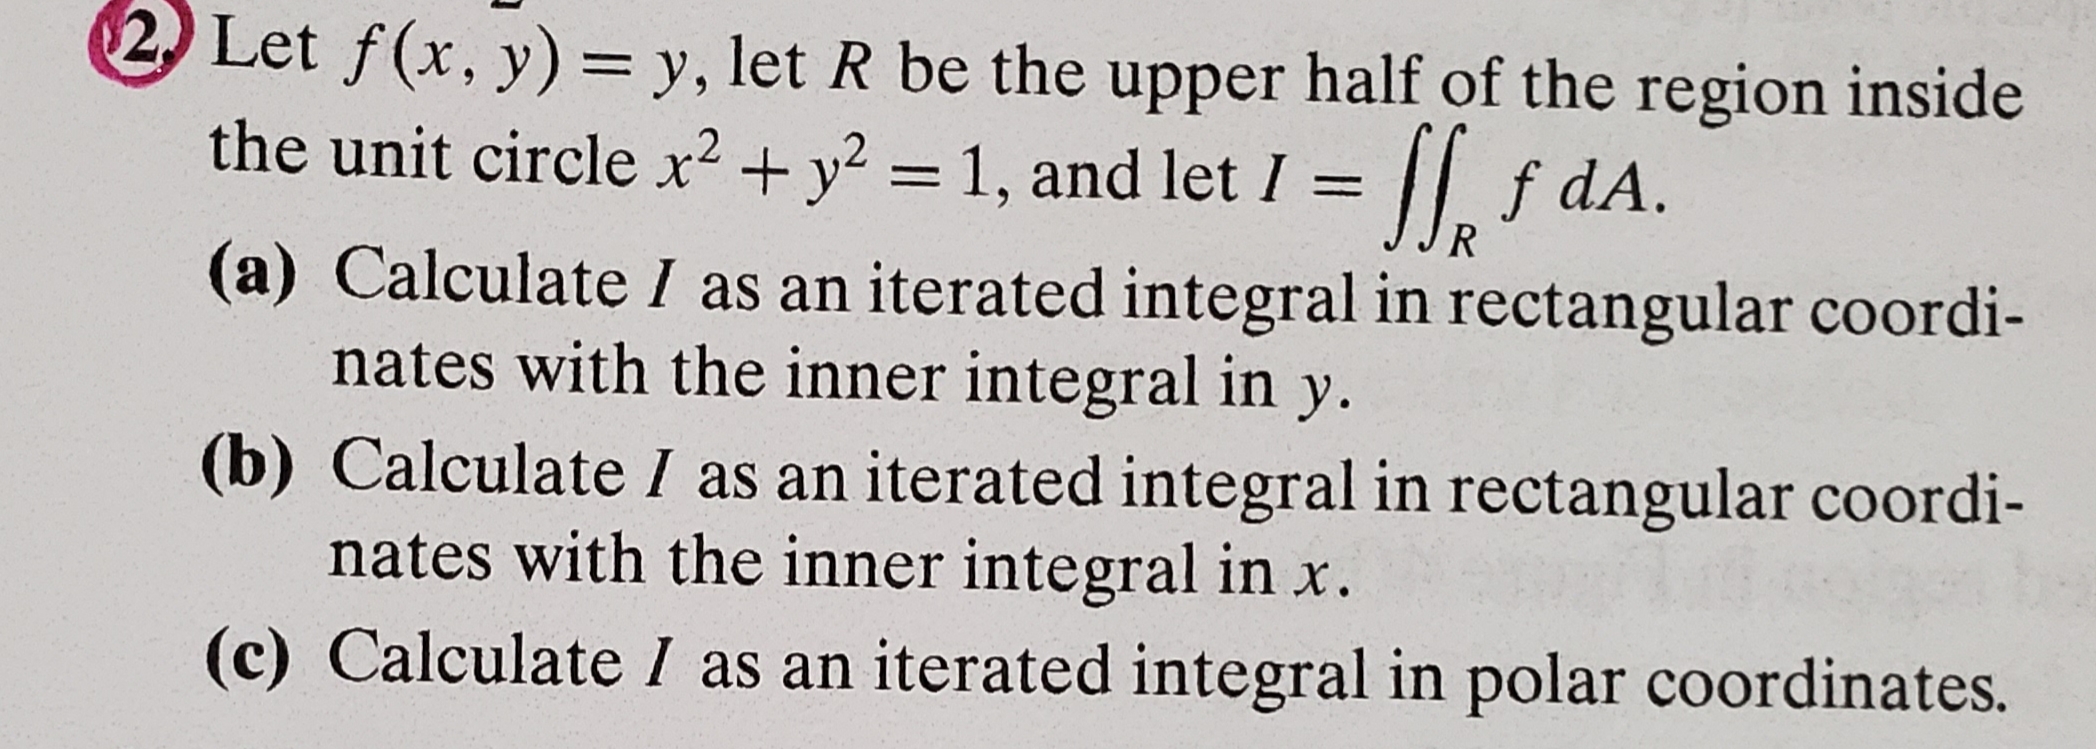 $2 Let f(x, y) = y, let R be the upper half of the region inside
the unit circle x2+y2 - 1, and let I |f dA.
1
R
(a) Calculate I as an iterated integral in rectangular coordi-
nates with the inner integral in y.
(b) Calculate I as an iterated integral in rectangular coordi-
nates with the inner integral in x.
(c) Calculate I as an iterated integral in polar coordinates.
